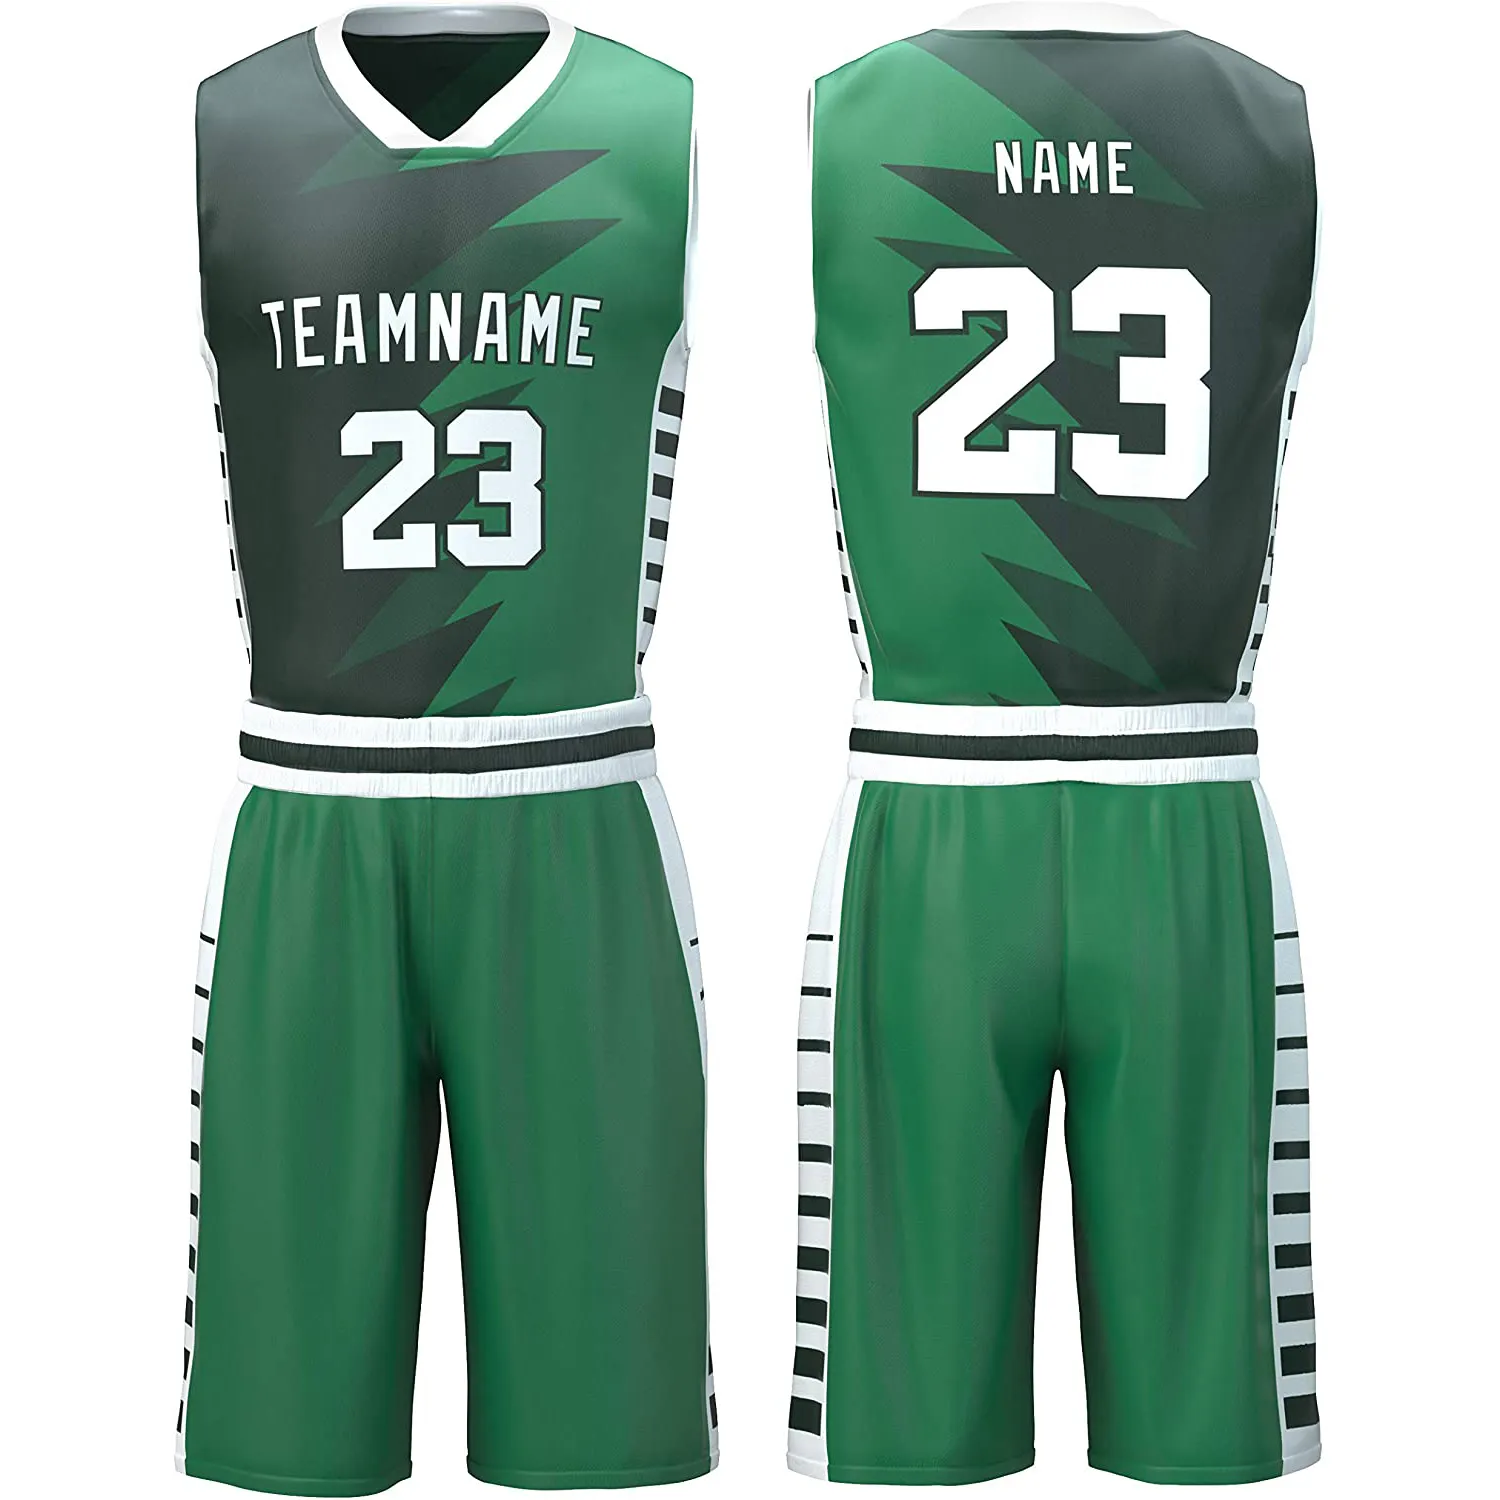 2023 New Jersey And Shorts Custom Men s Basket Ball Uniform Jersey Dresses For Basket Ball Uniform team wear low price